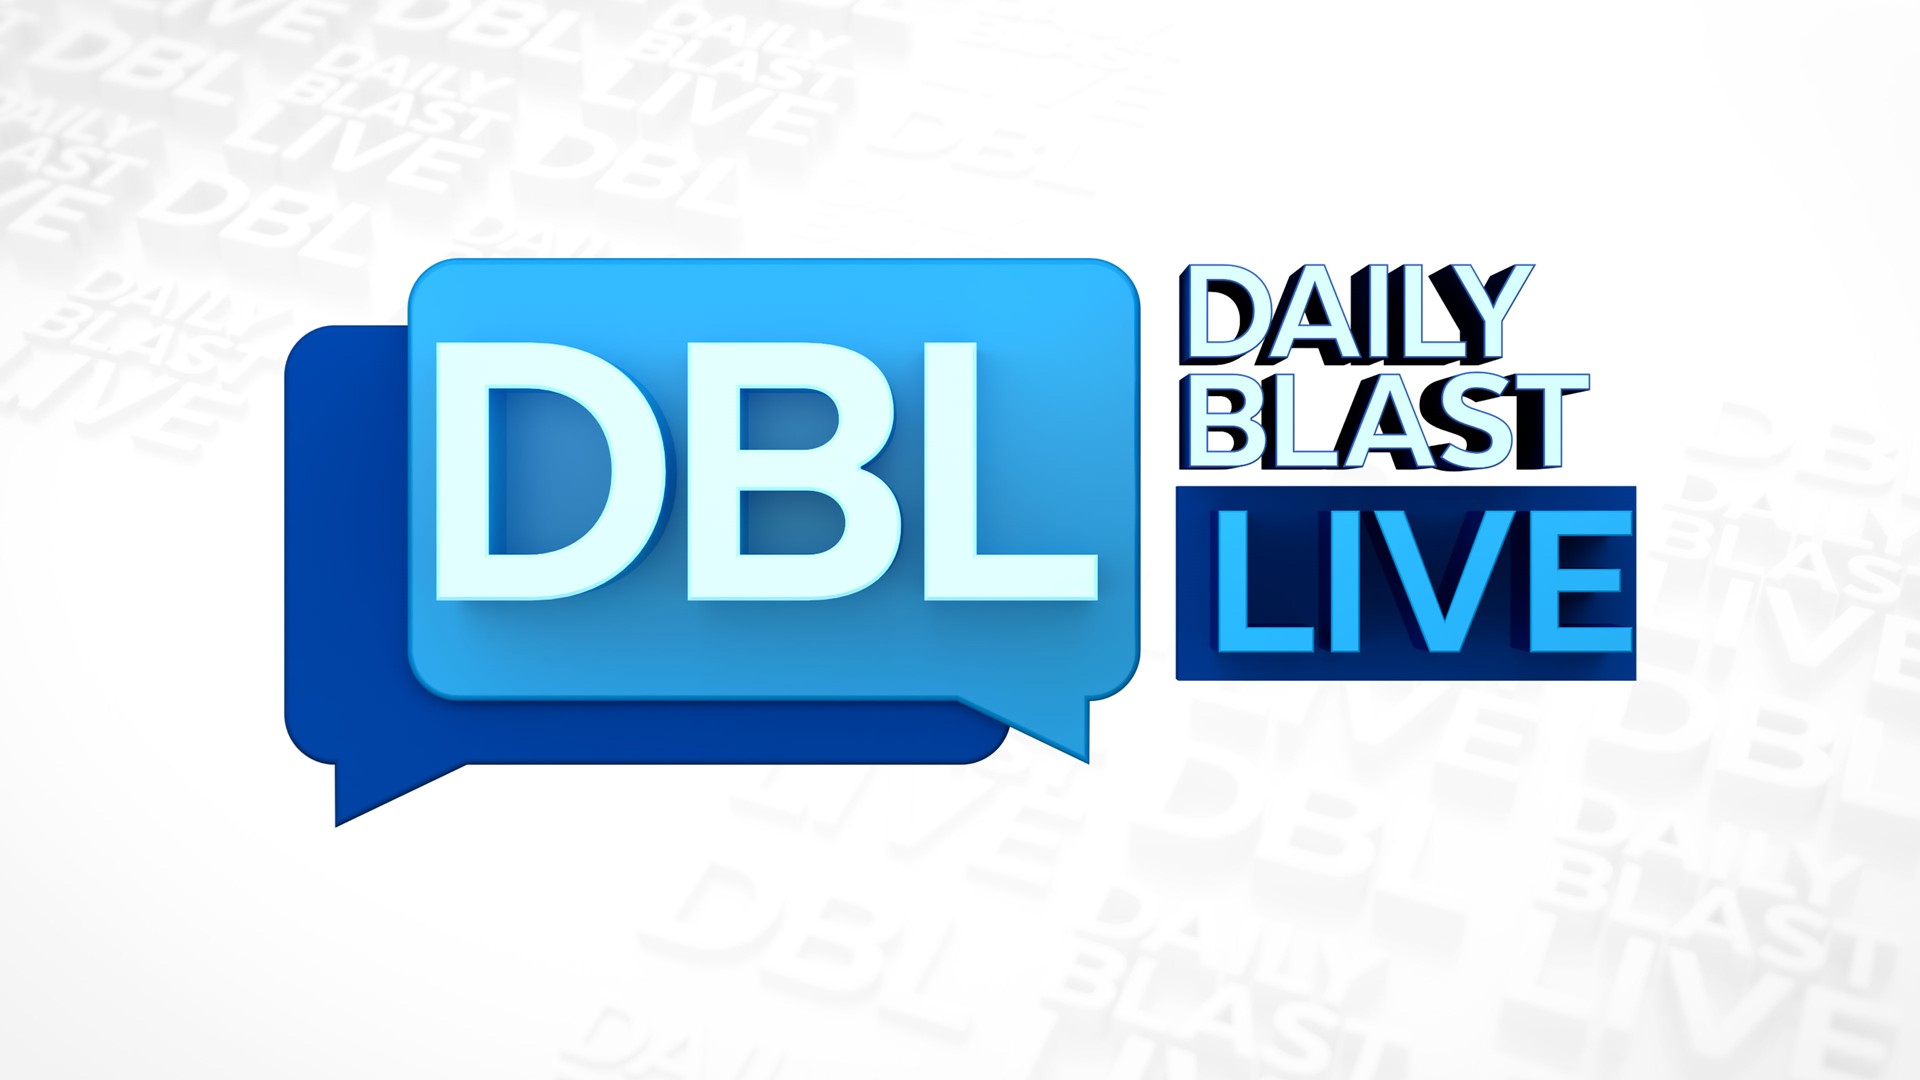 Daily Blast Live brings you the latest trending stories 24/7 with broadcast and digital teams delivering a fun, entertaining and exciting look at headlines.